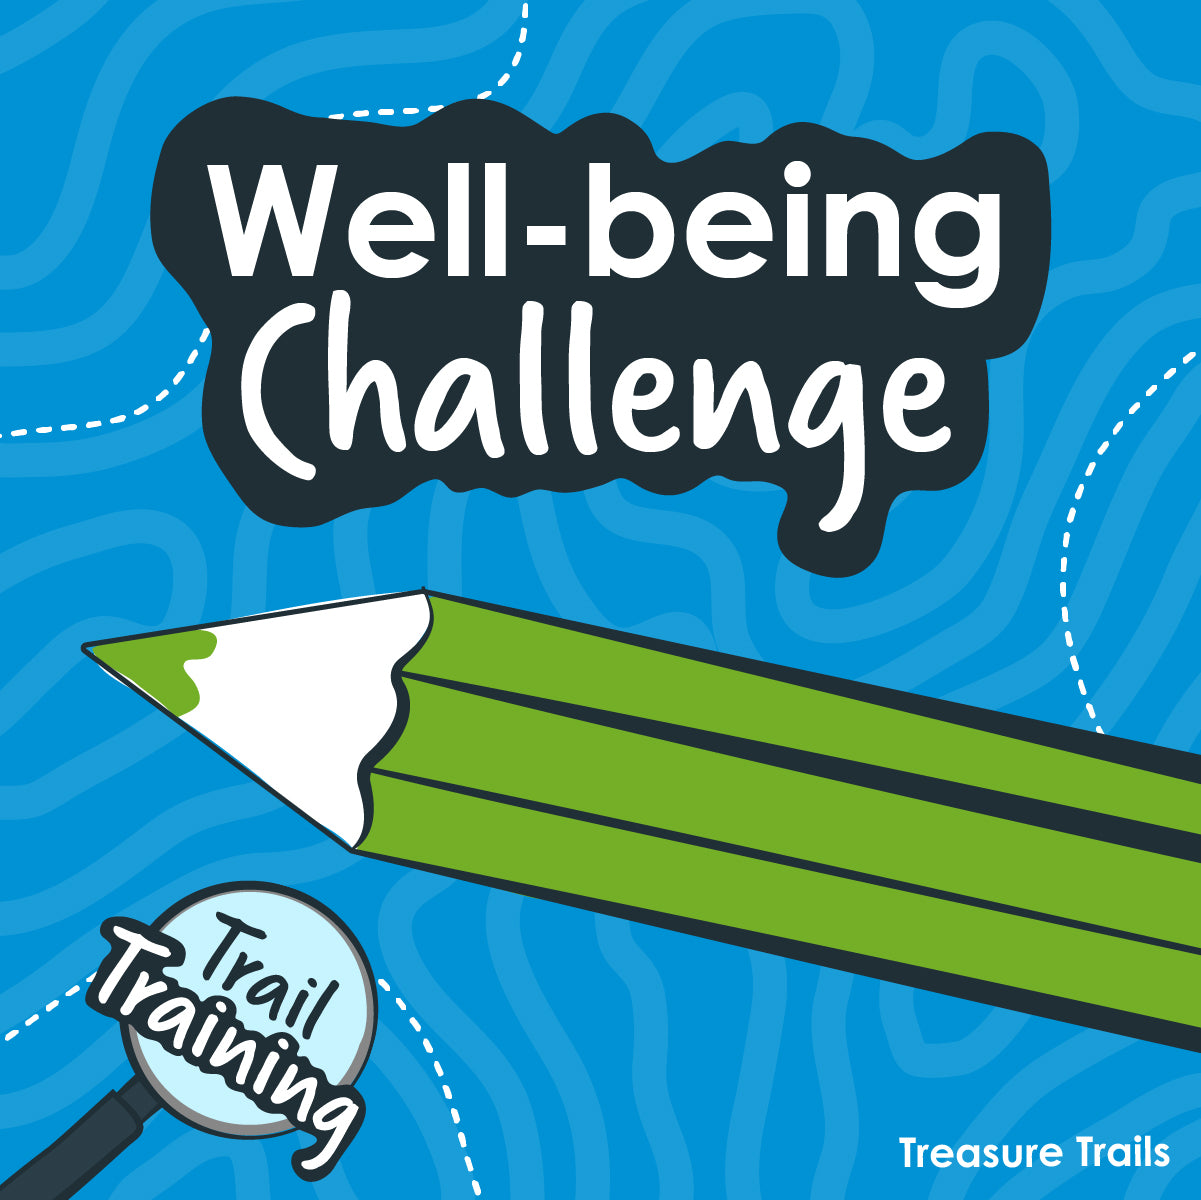 Trail Training Part II - Well-being Challenge